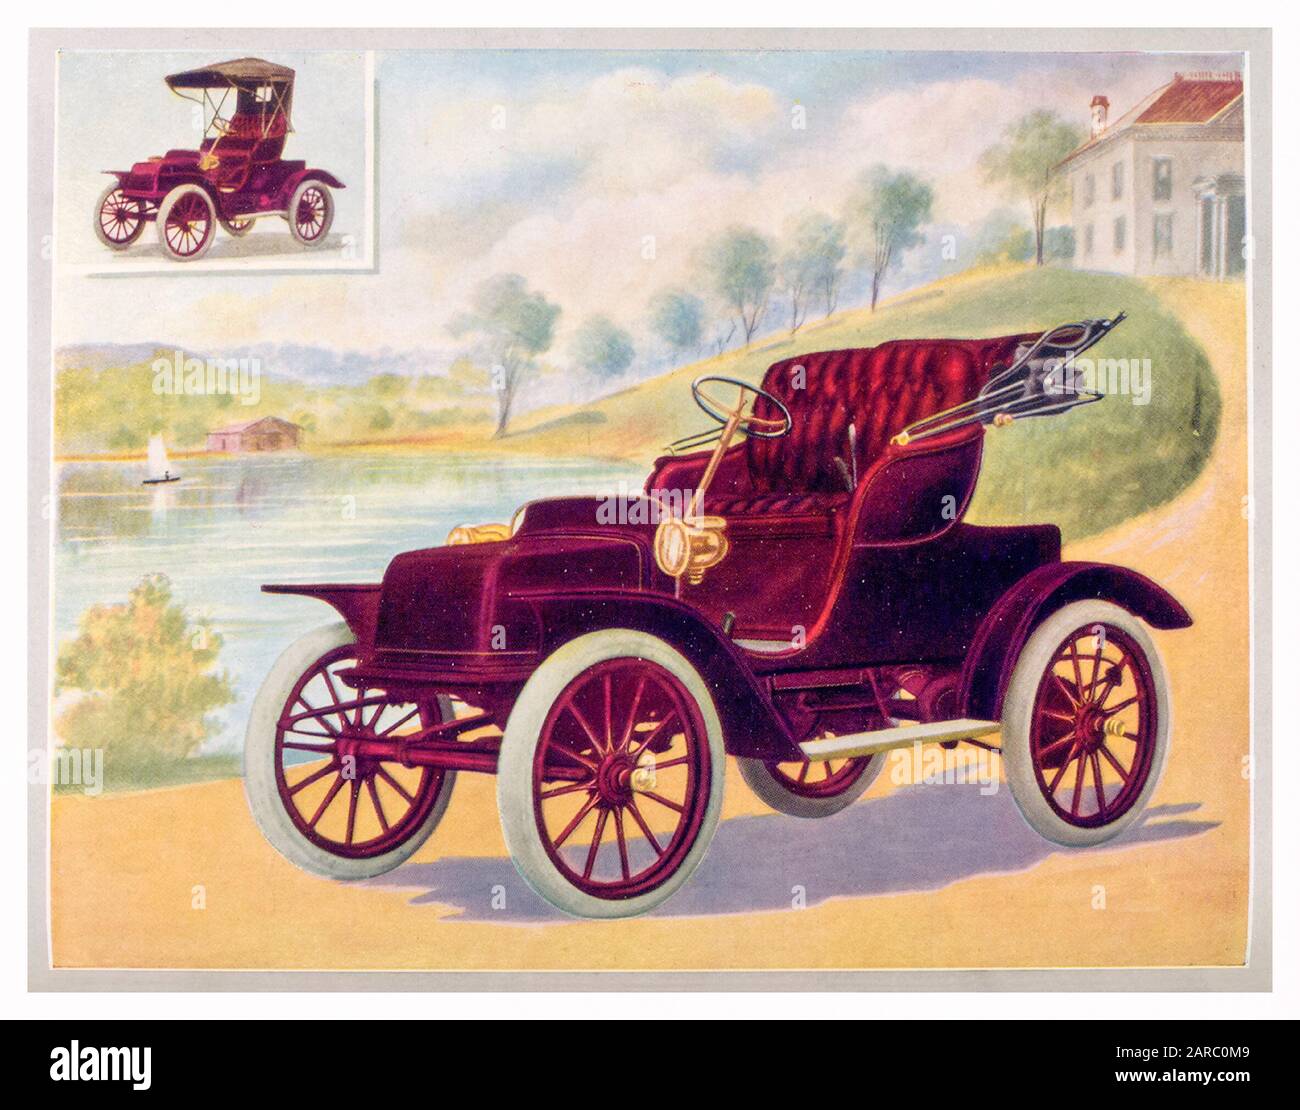 Early Electric Car, Vintage Car, Model 5 Runabout, Price $1600, by Babcock Electrics, illustration 1909 Stock Photo